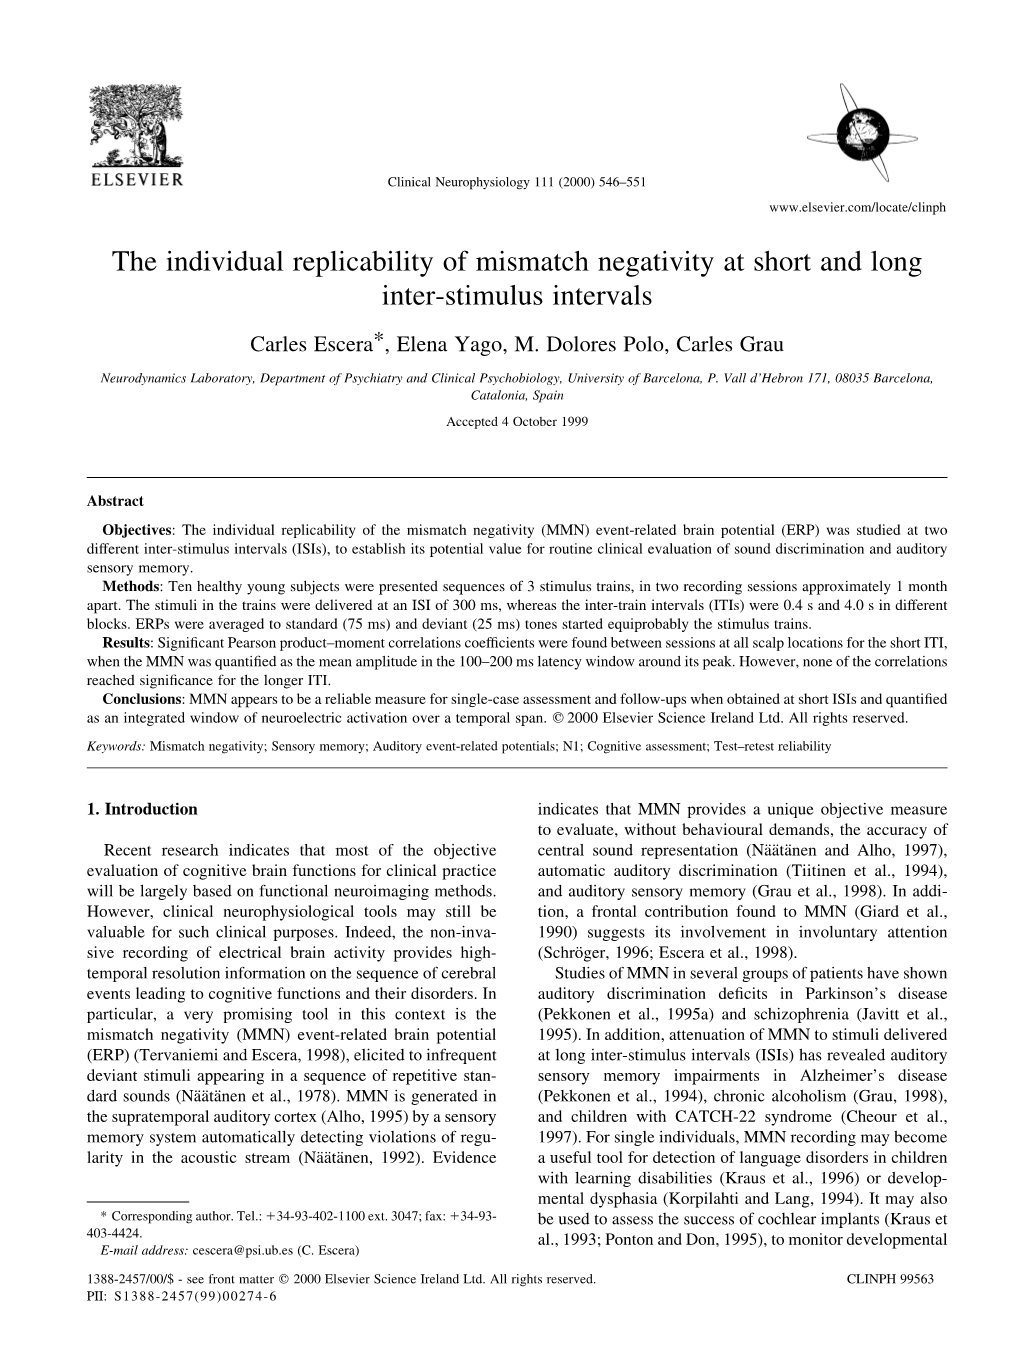 The Individual Replicability of Mismatch Negativity at Short and Long Inter-Stimulus Intervals